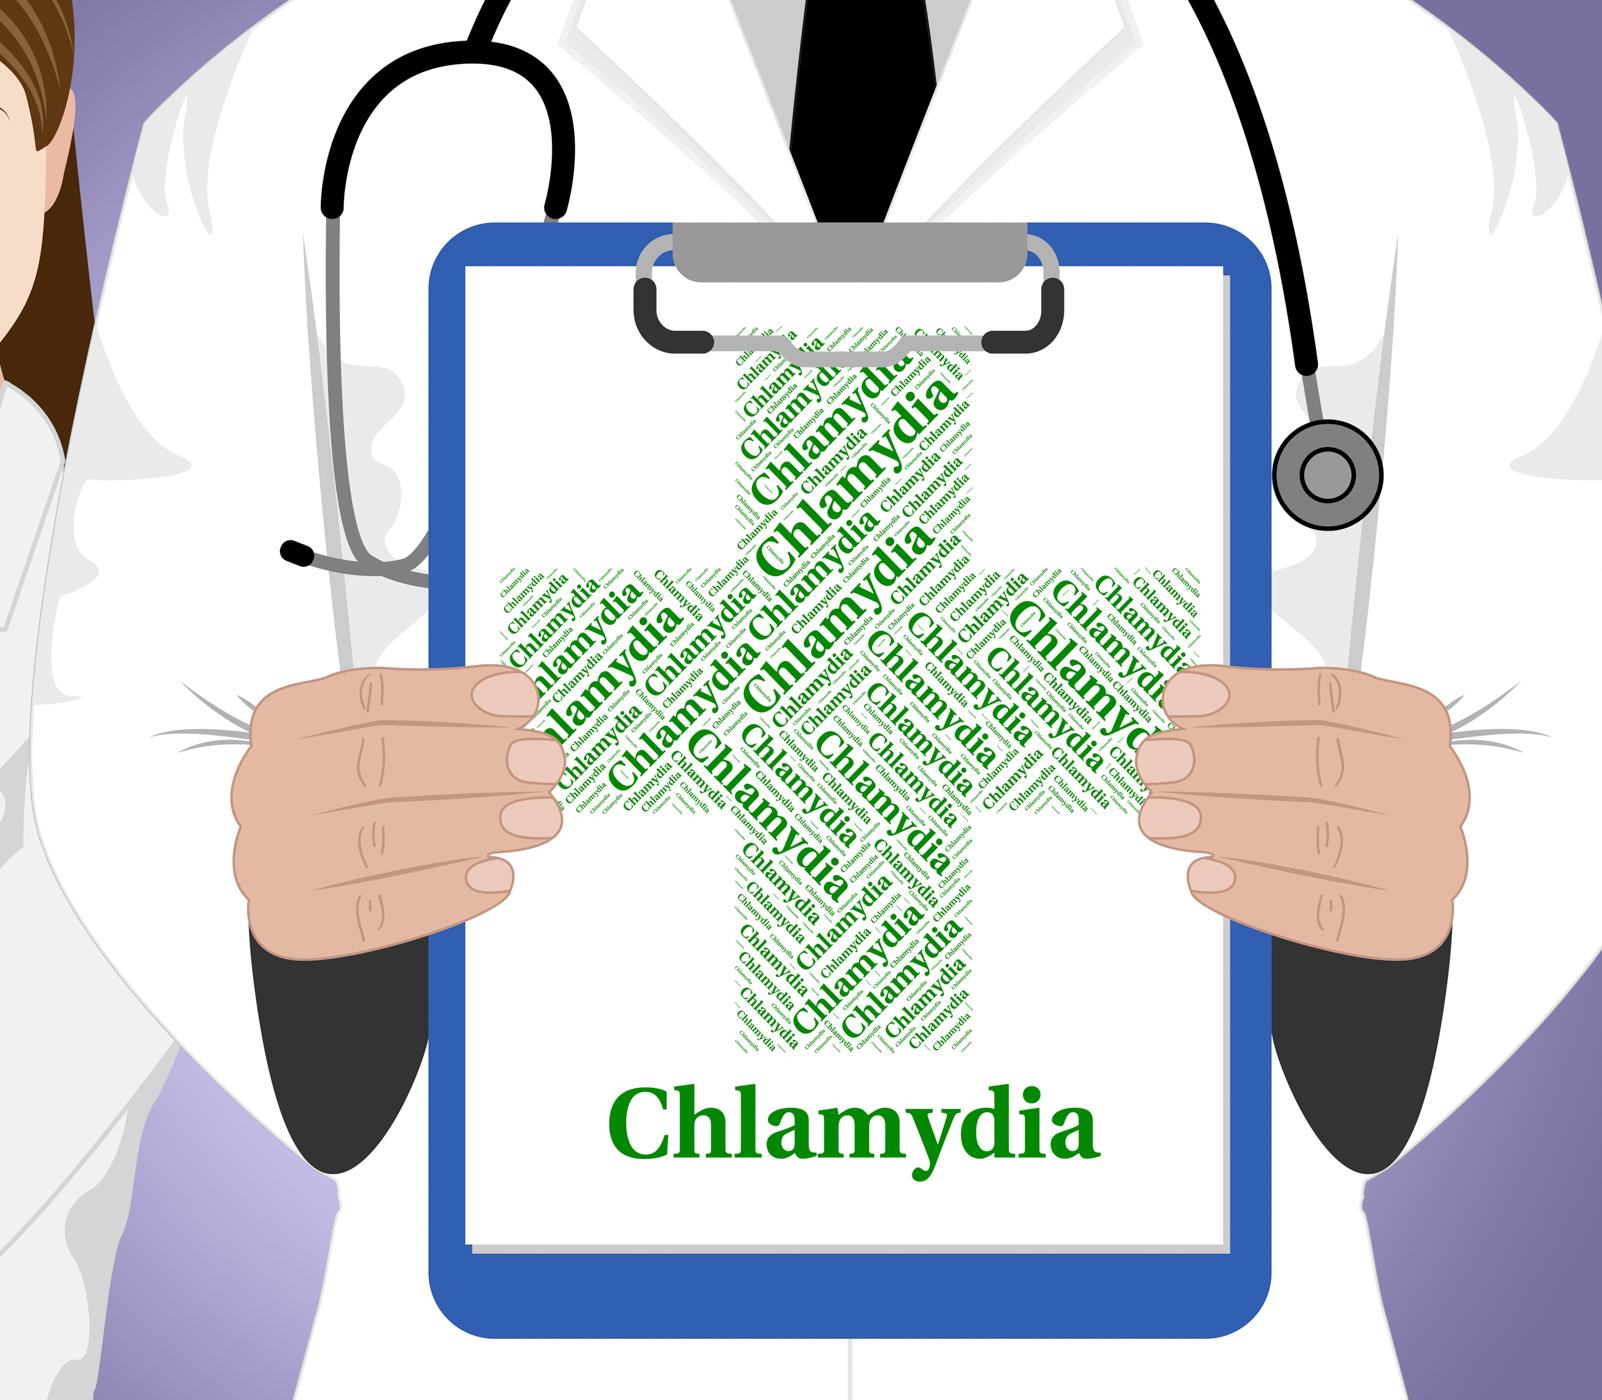 Chlamydia word indicates sexually transmitted disease and vd photo